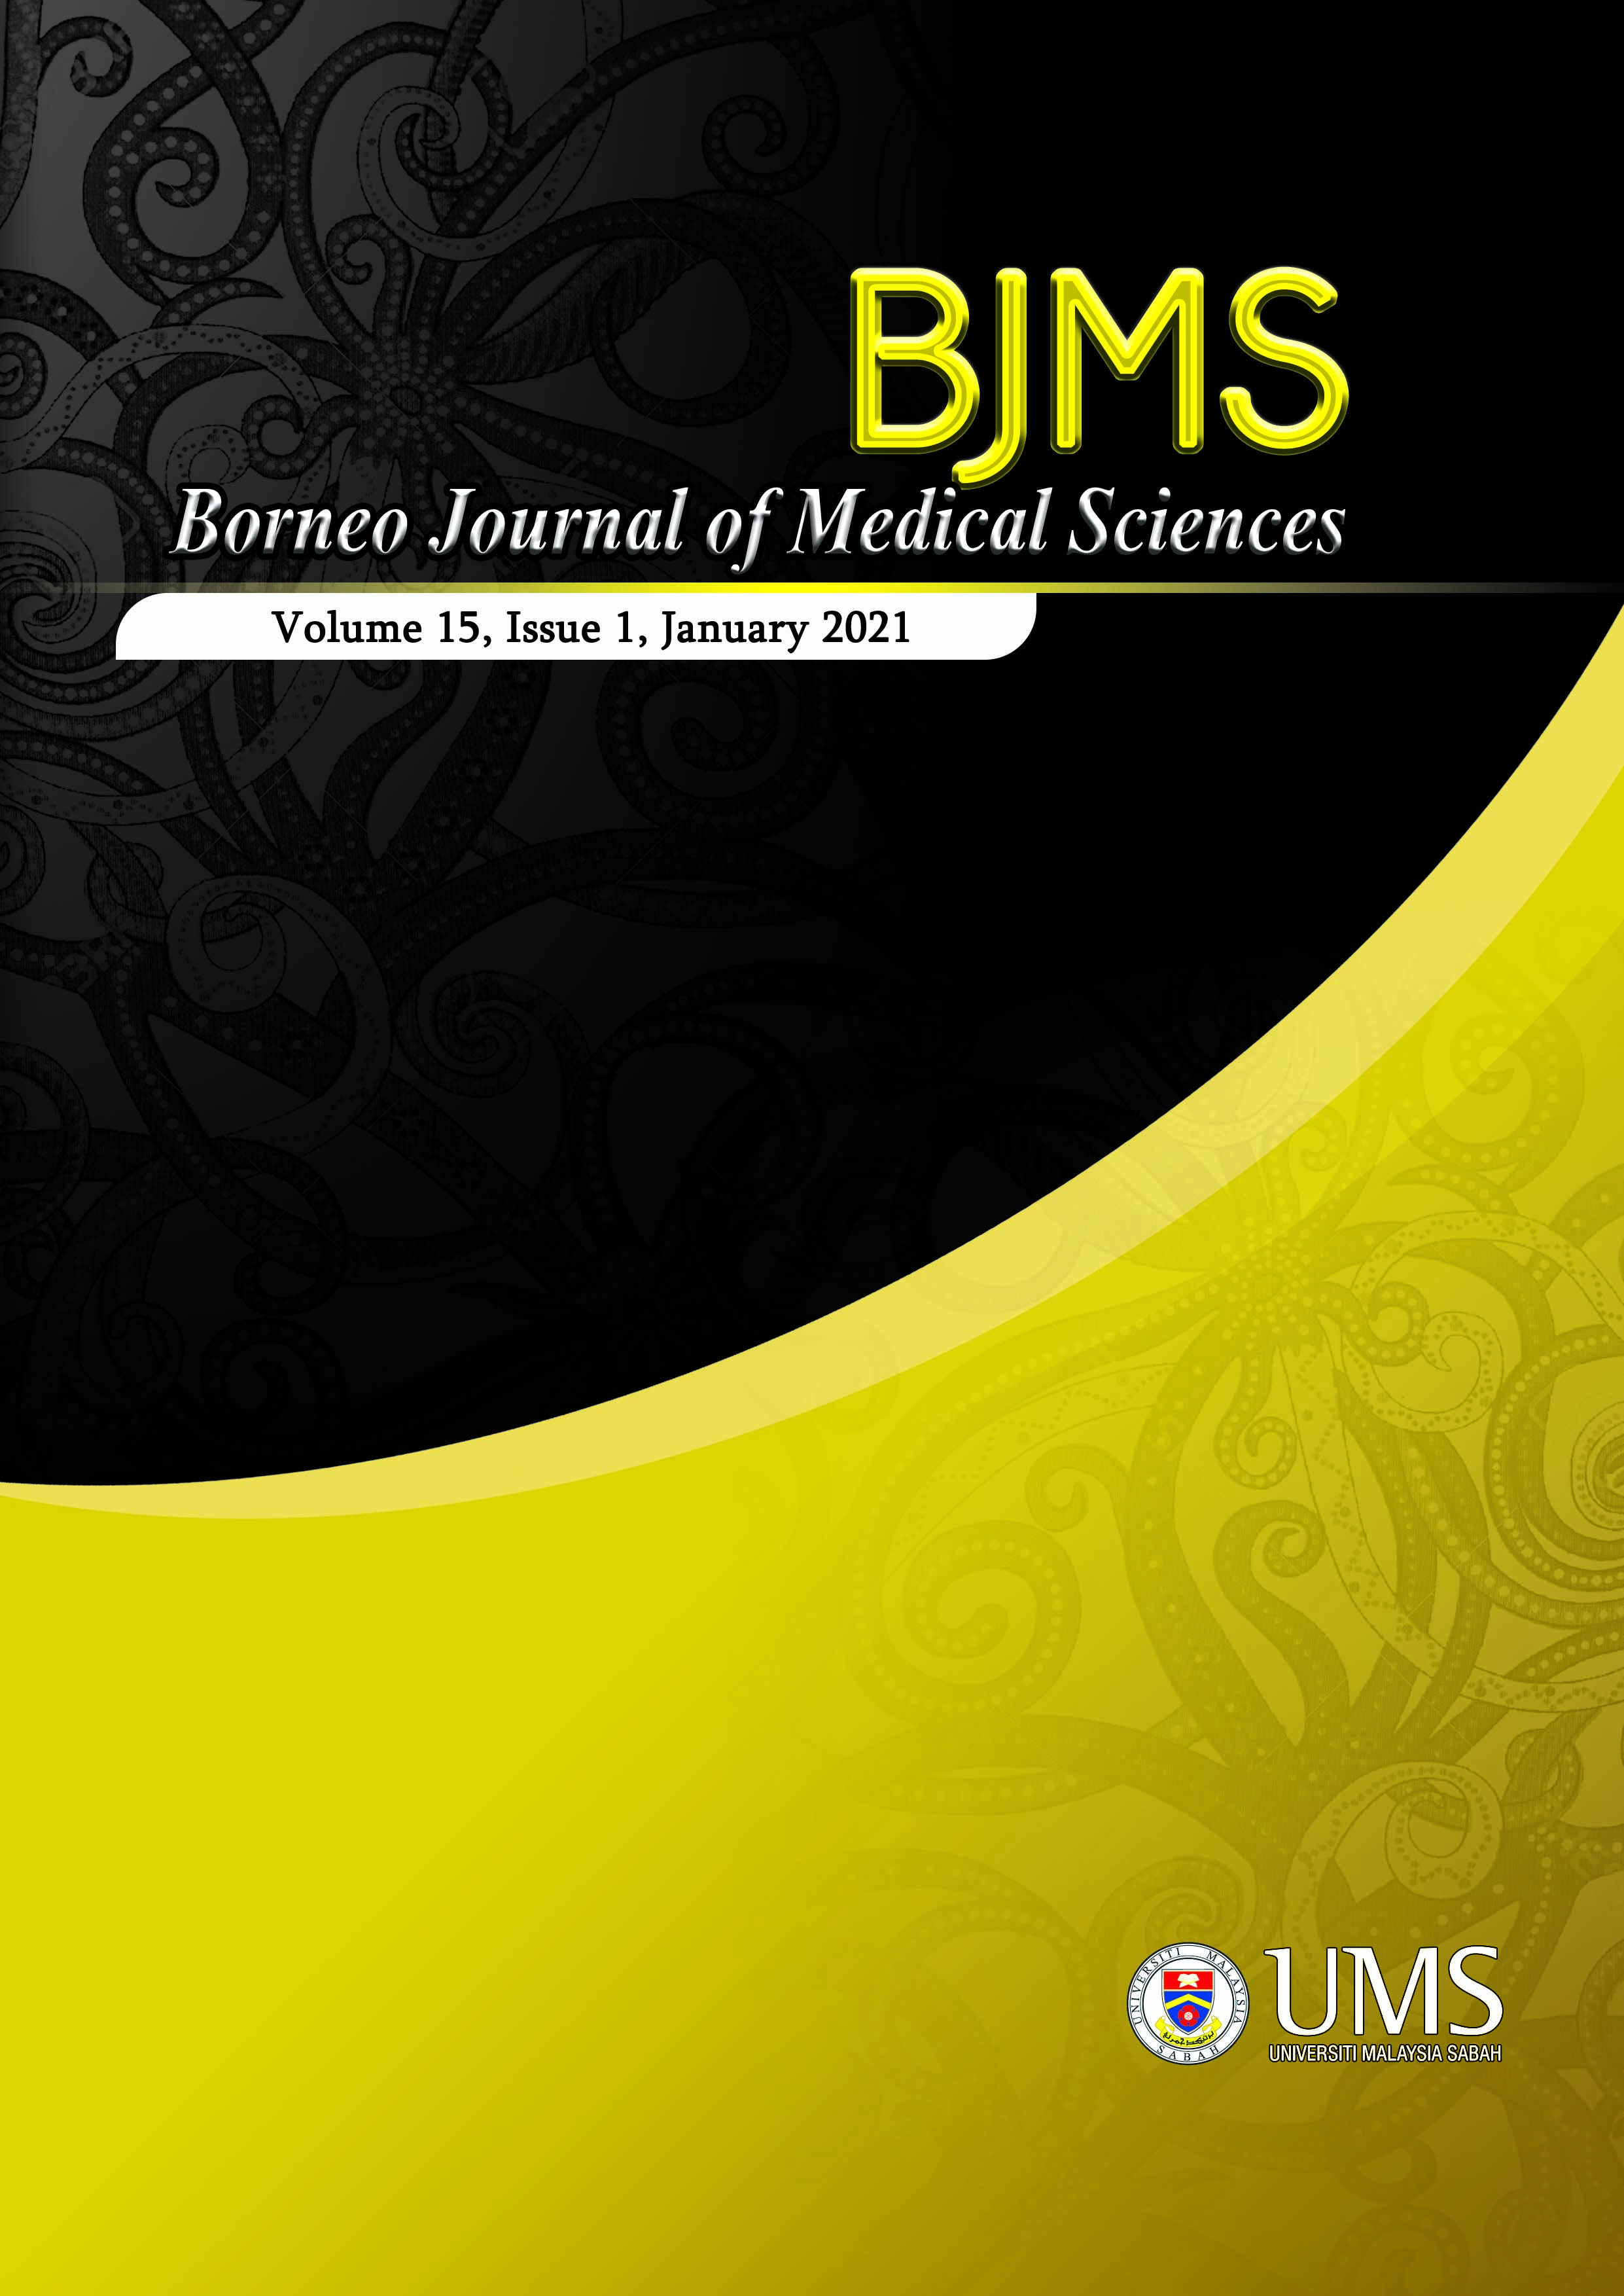 					View Vol. 15 No. 1 (2021): BORNEO JOURNAL OF MEDICAL SCIENCES VOLUME 15, ISSUE 1, JANUARY 2021
				